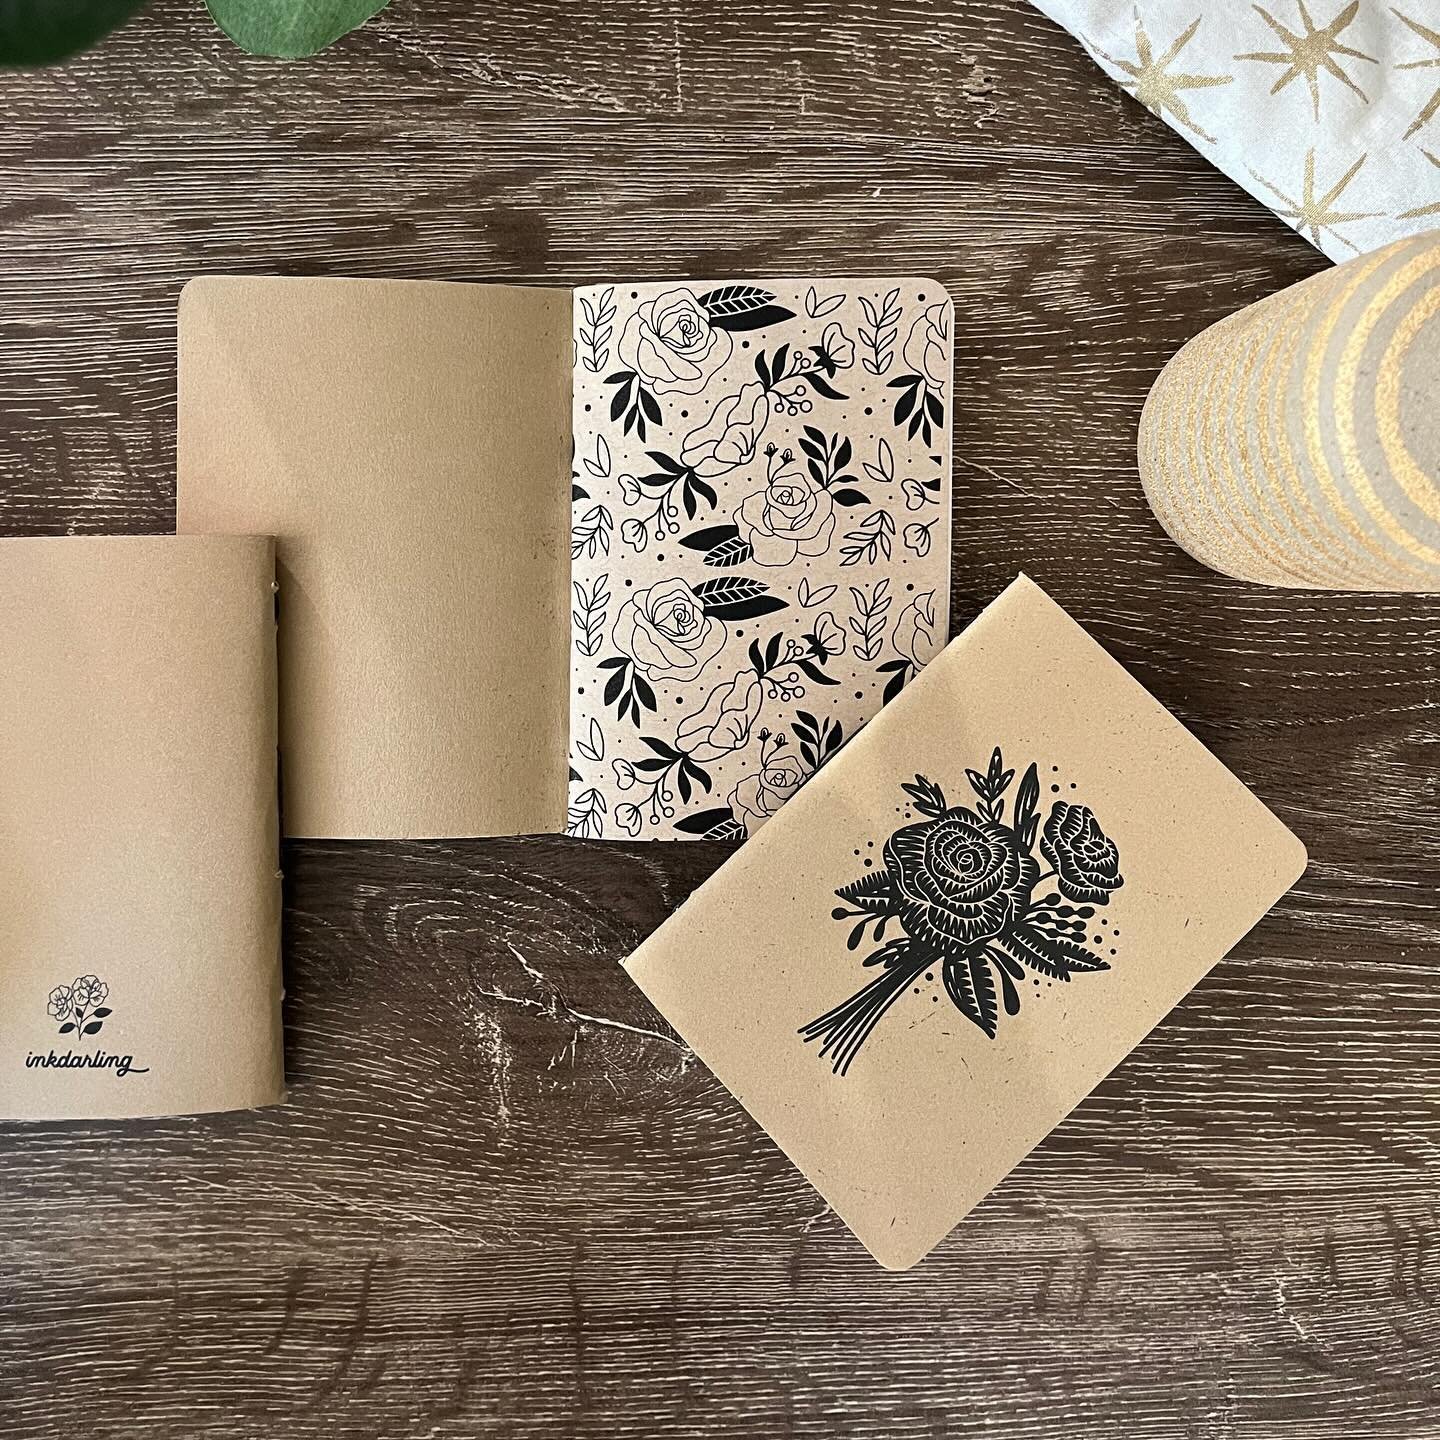 Made from home. Made with love.

Inspired by linocut printmaking and traditional tattoos, this lil sketchbook is decorated with intricately designed roses. Measuring 3.5 x 5.25 inches, this companion piece is made with high-quality sketch paper and a